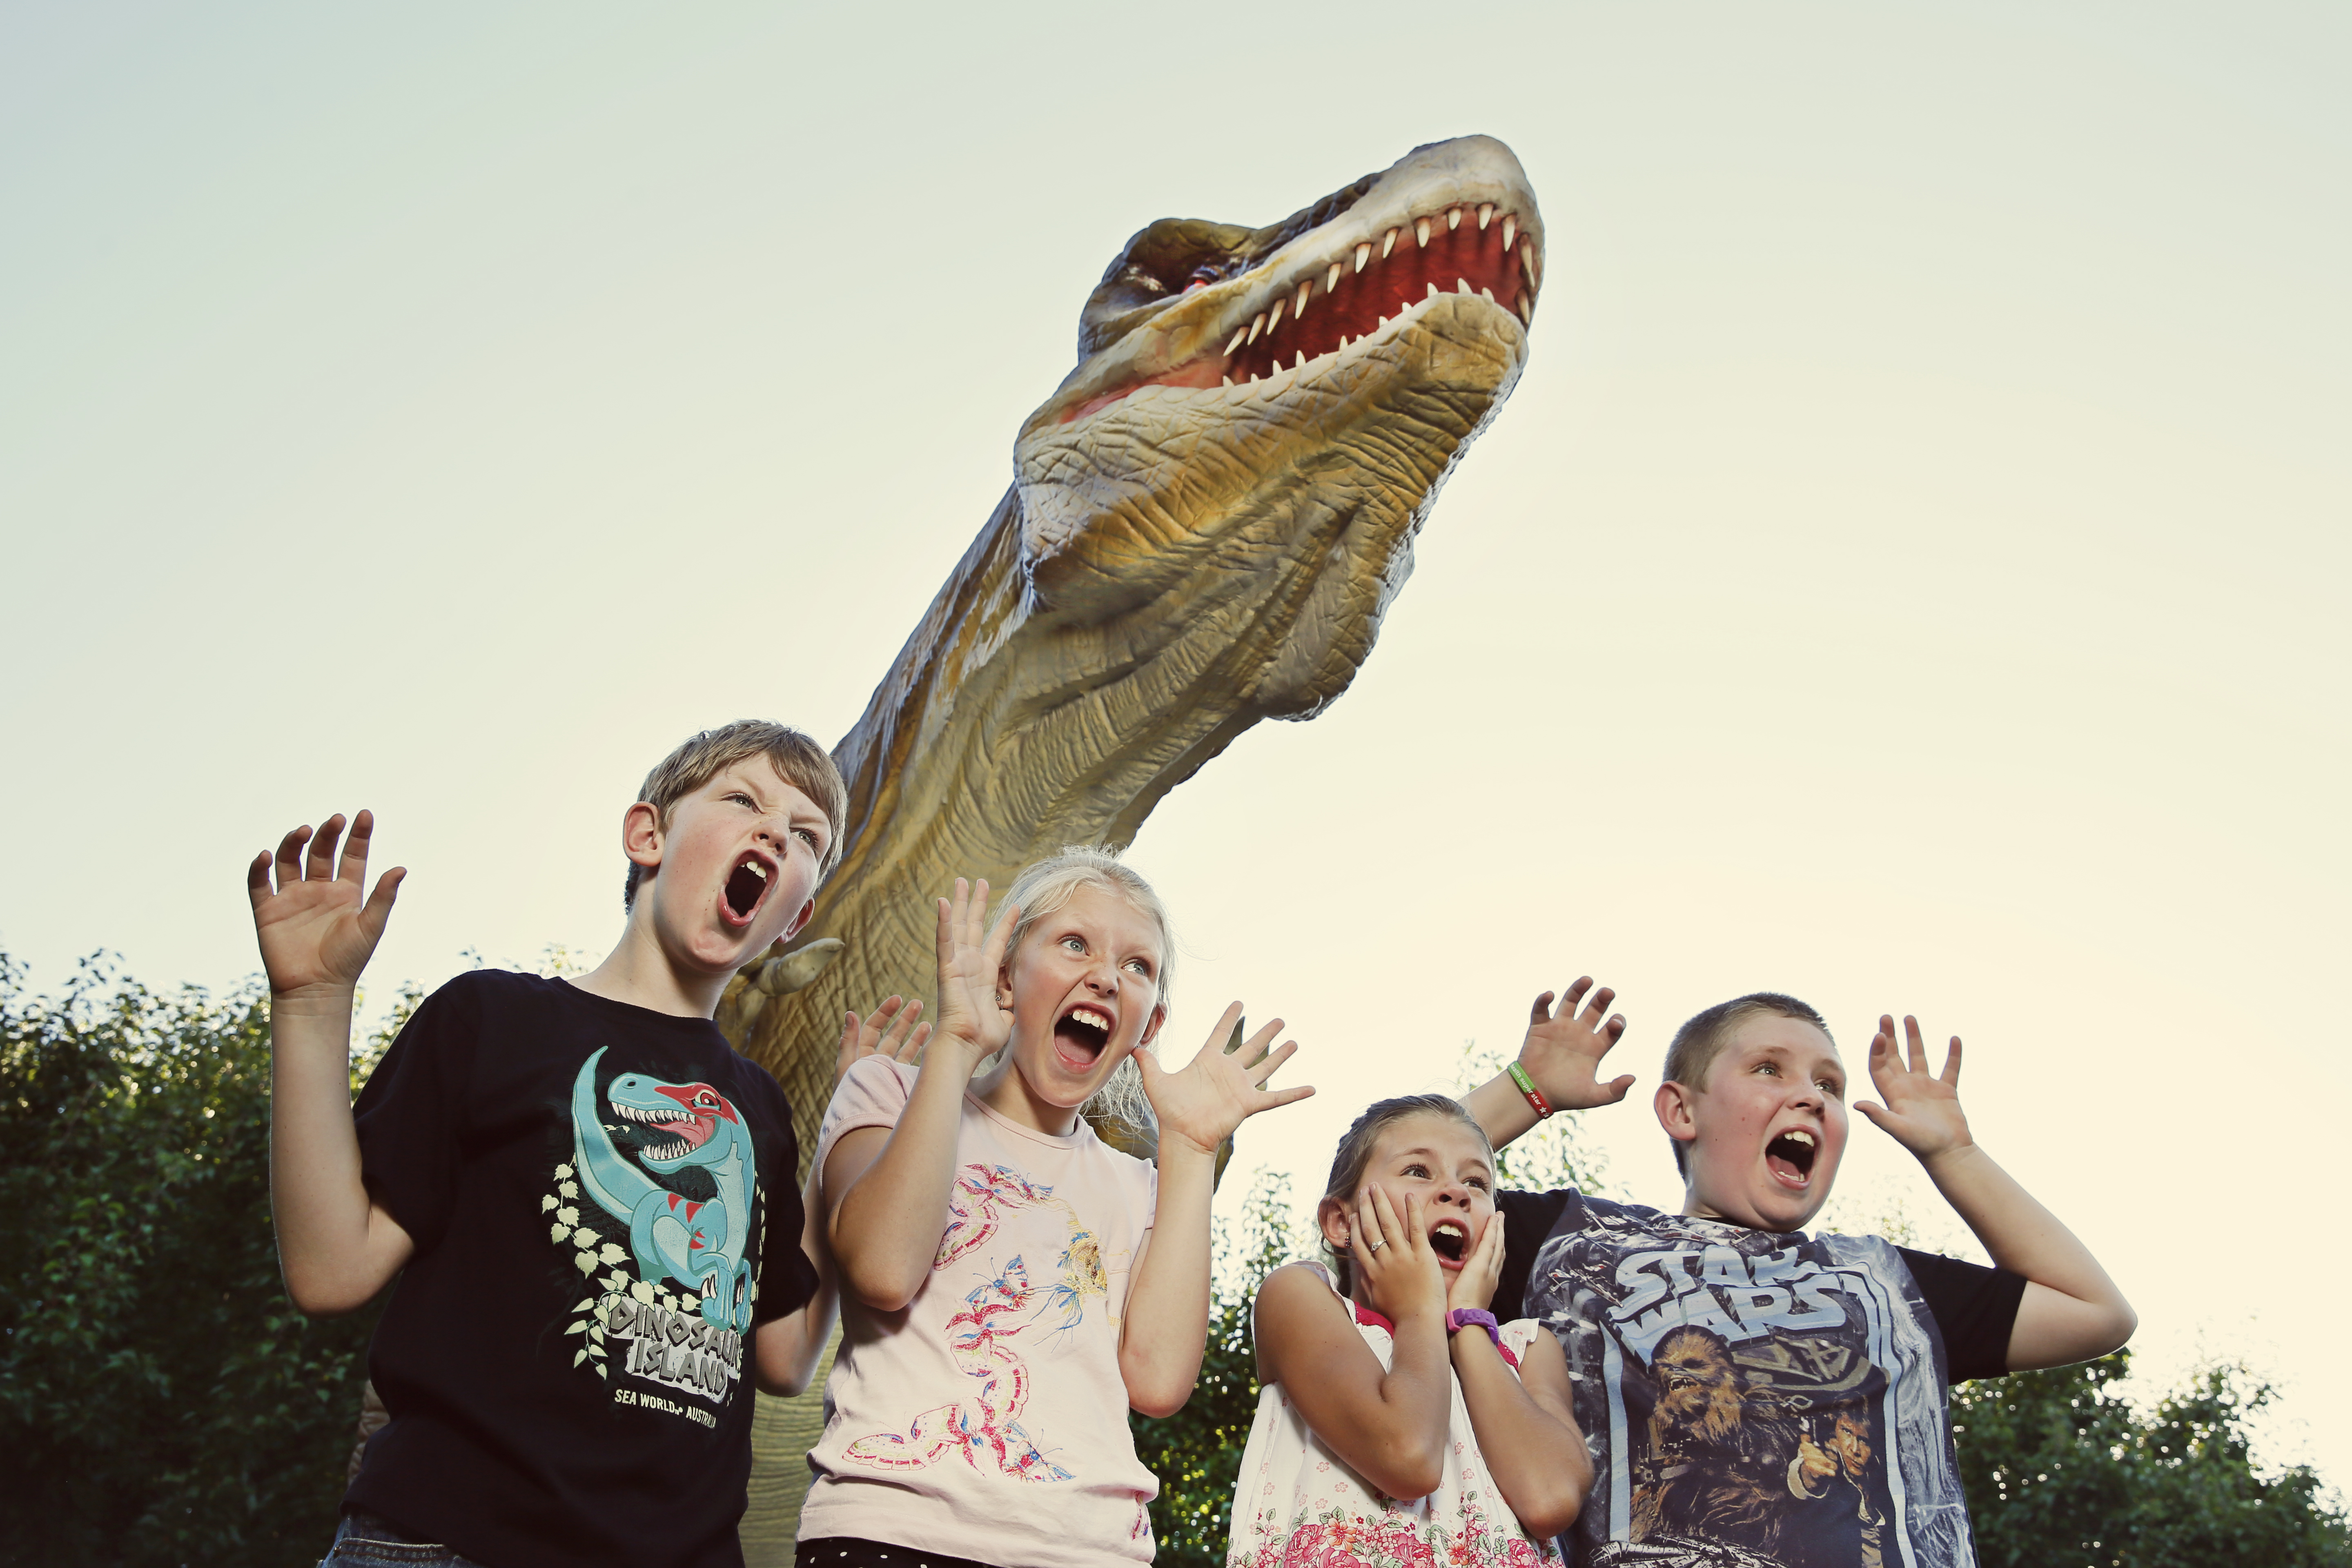 Interactive Dinosaur thrills at the Mega Creatures display. Photo by Chris Elfes (Elfes Images)